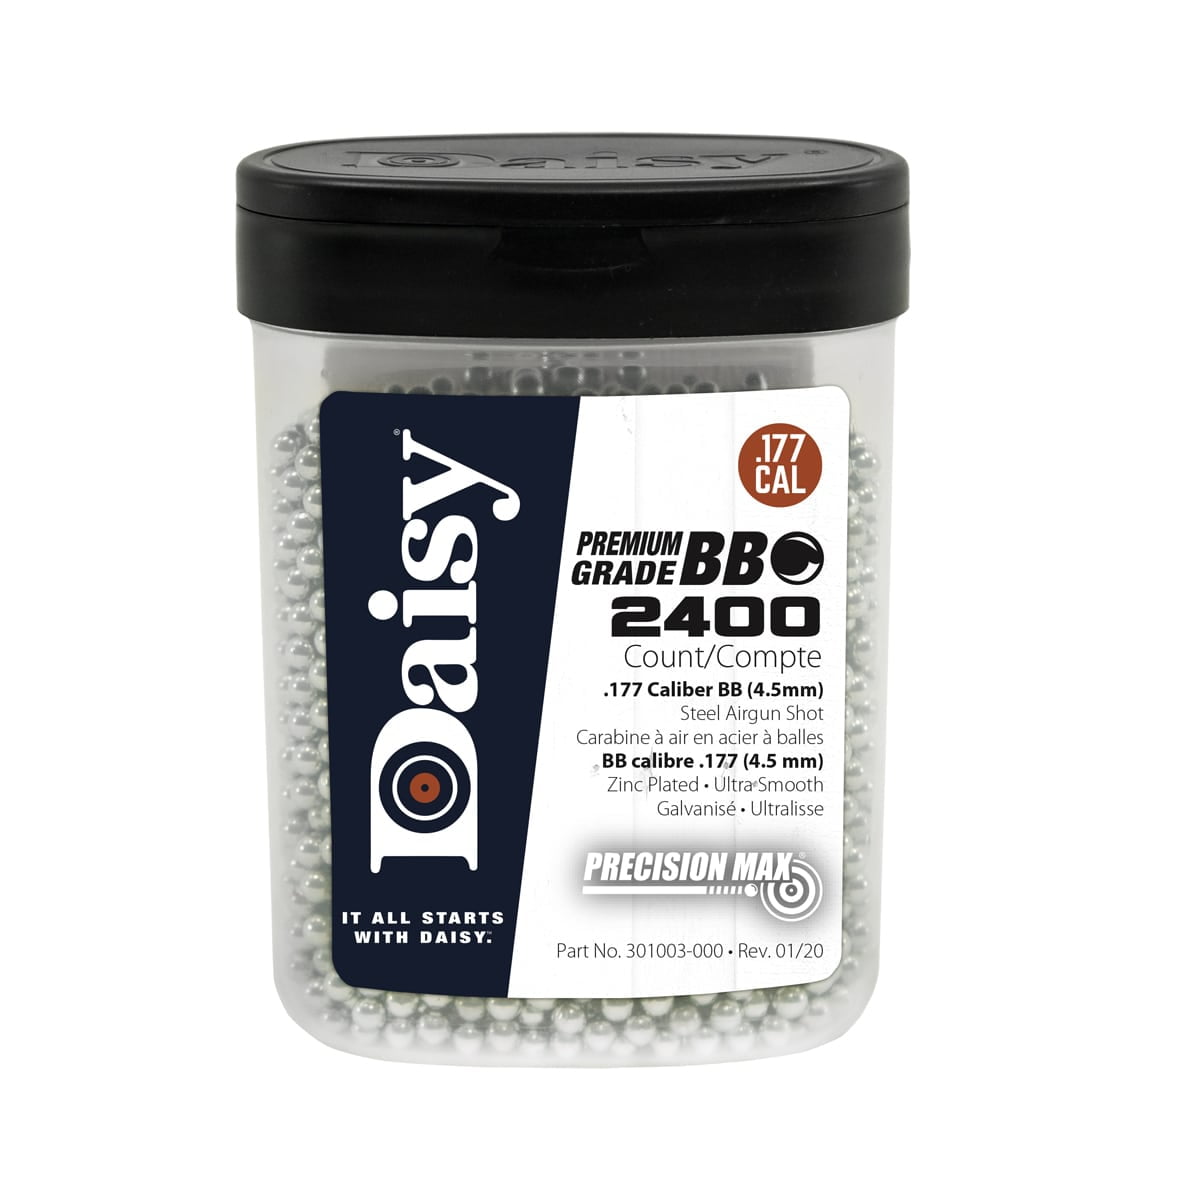 Genuine .177 Caliber Daisy BBs 2400 PC Count 1.86 LB Container 